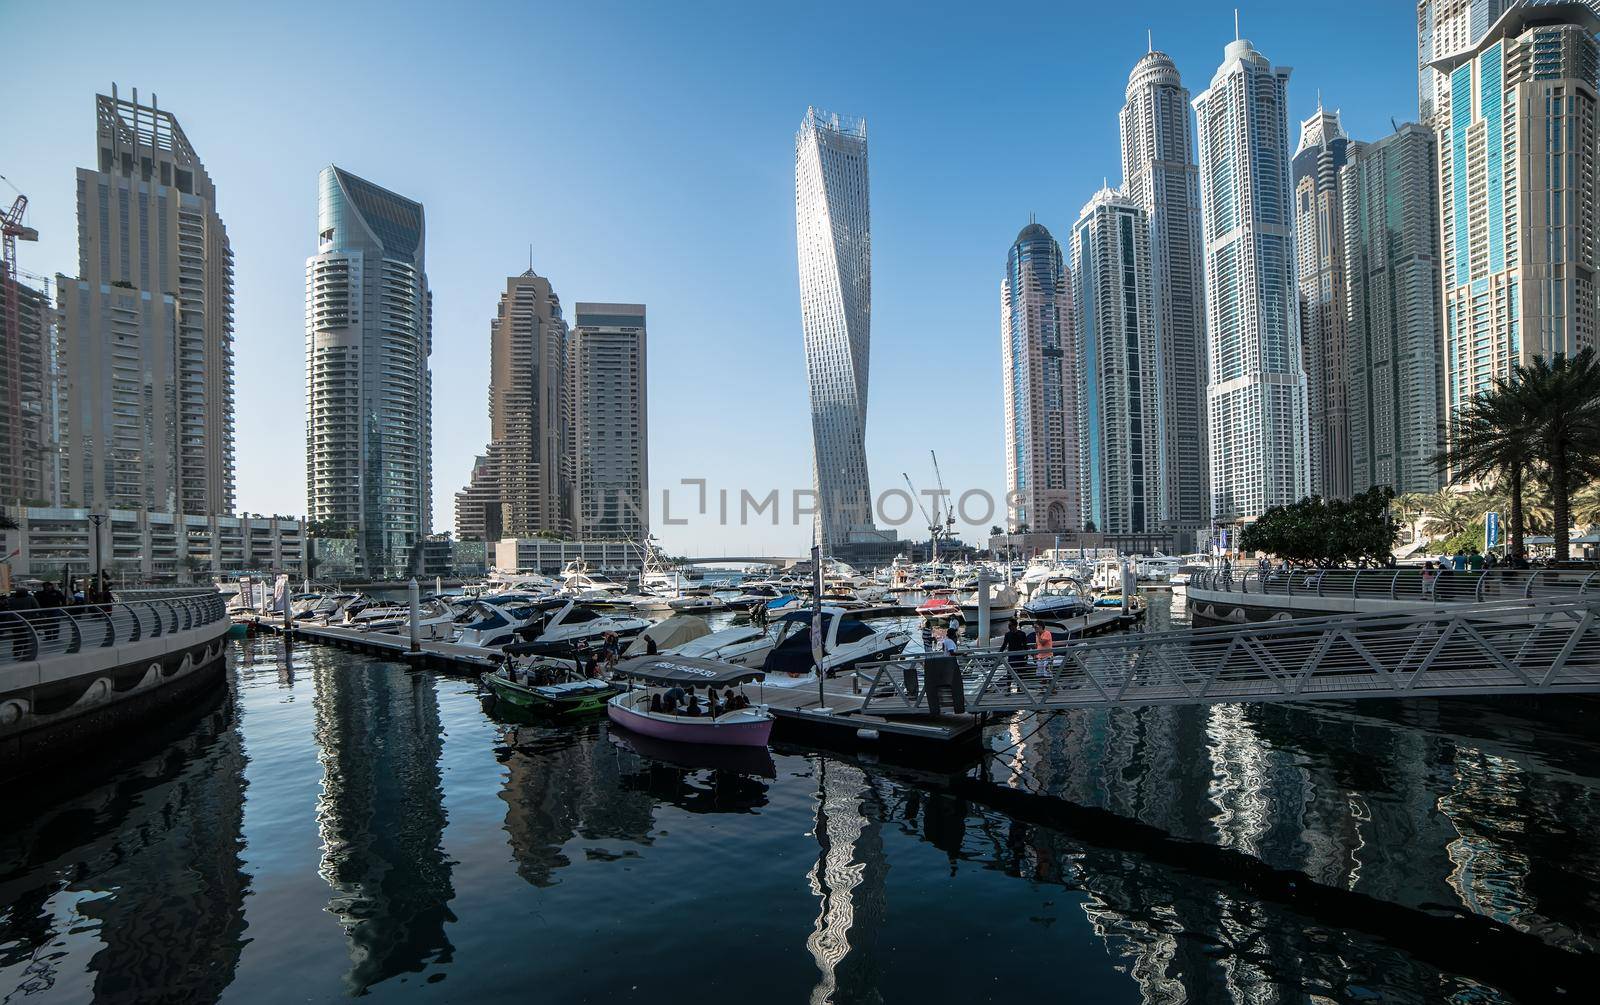 Dubai, United Arab Emirates - December 14, 2013: Panoramic view with modern skyscrapers and water channel of Dubai Marina, United Arab Emirates